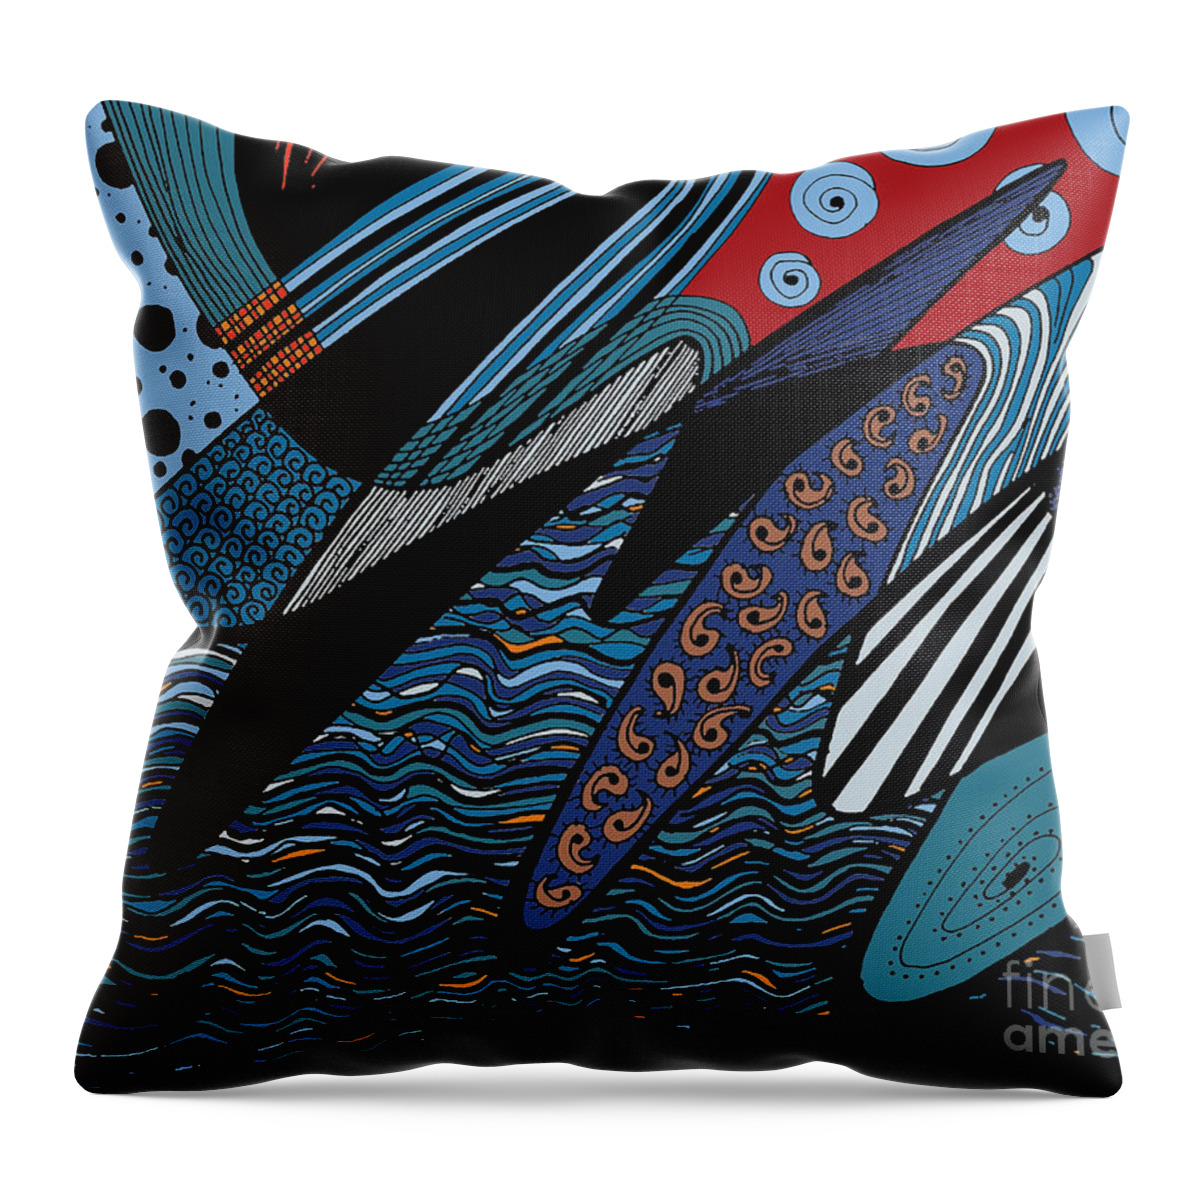 Waves Throw Pillow featuring the digital art Waves by Lynellen Nielsen